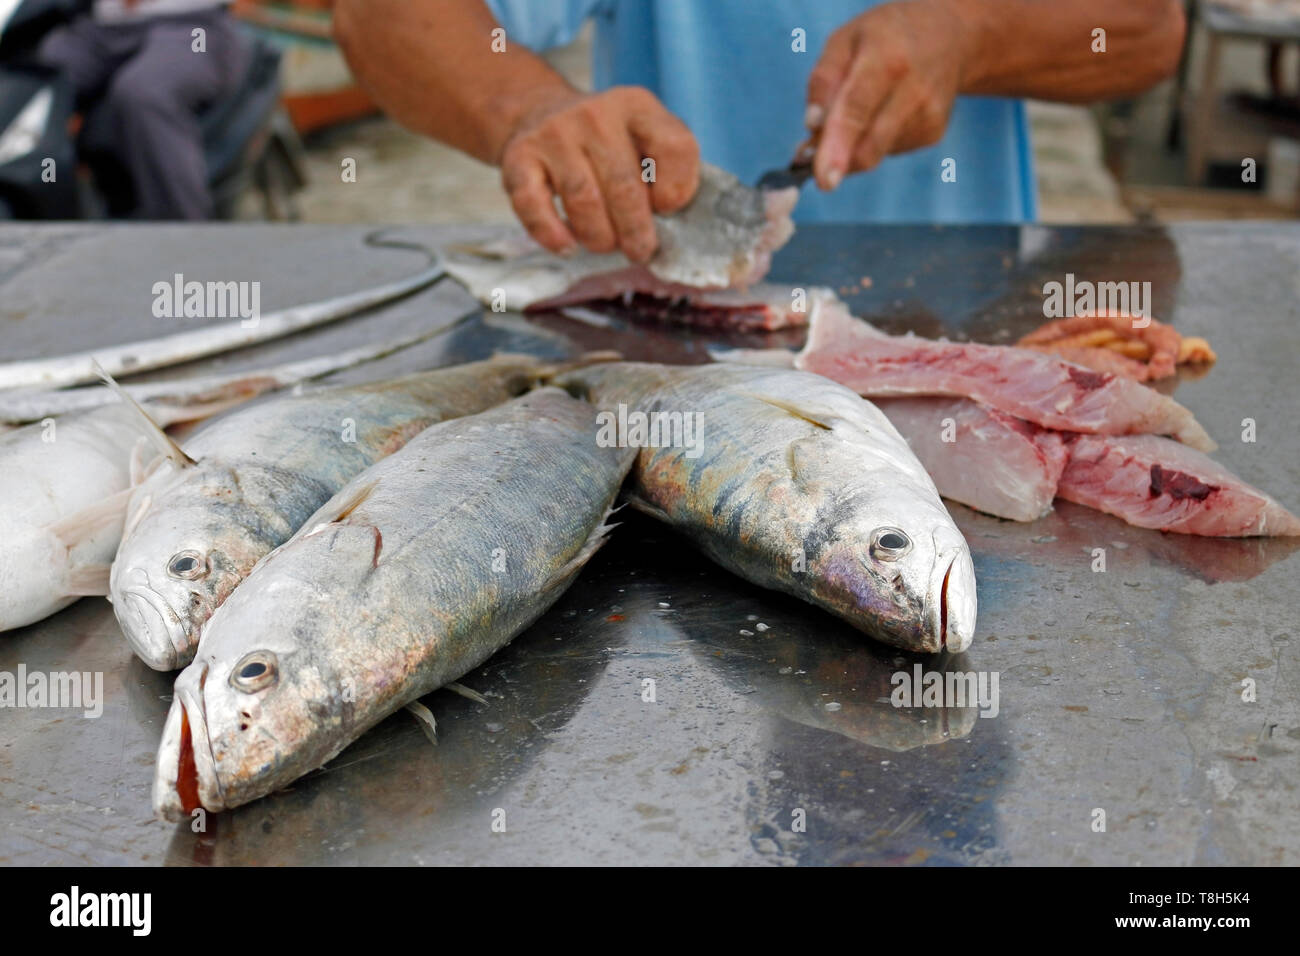 The fisherman cleans fresh fish that he has just caught in the sea. Your customers are waiting. he skilfully uses a sharp knife. Stock Photo